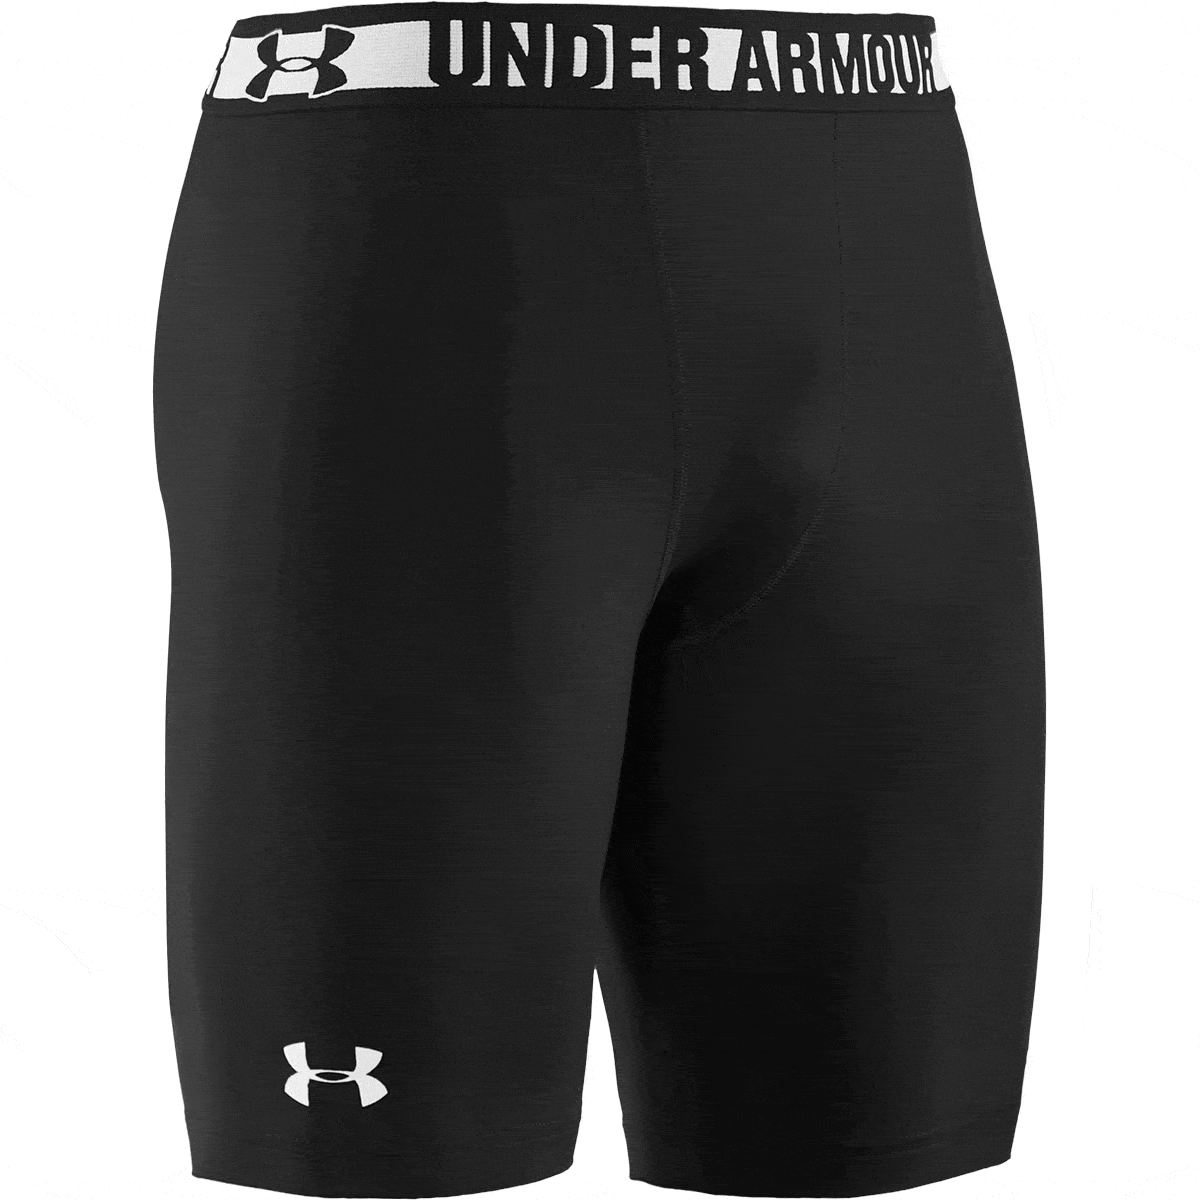 Under Armour Compression Short - Ruggers Team Stores